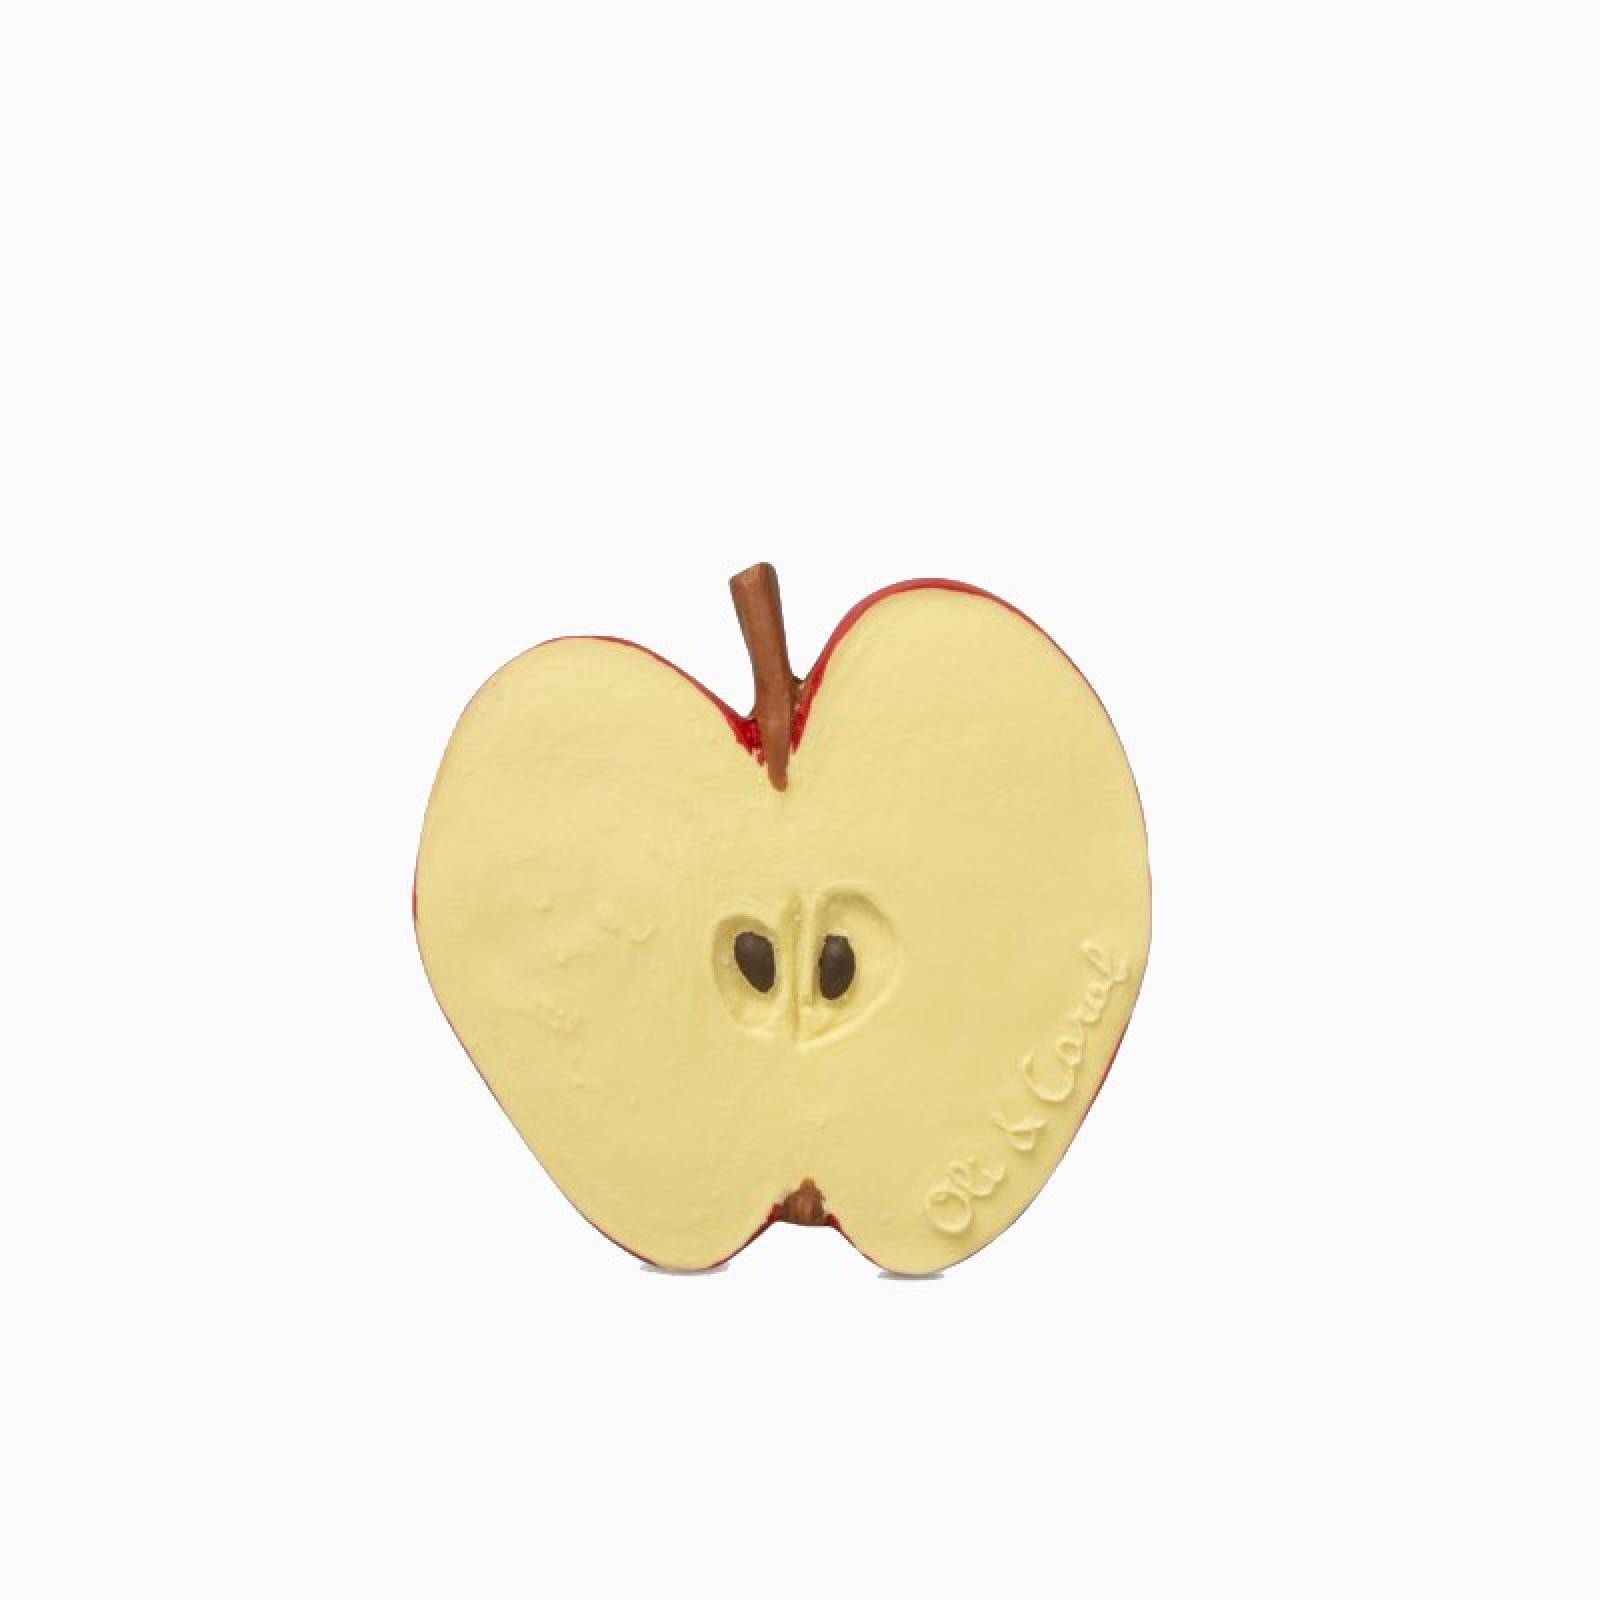 Pepita The Apple - Natural Rubber Teething Toy 0+ thumbnails